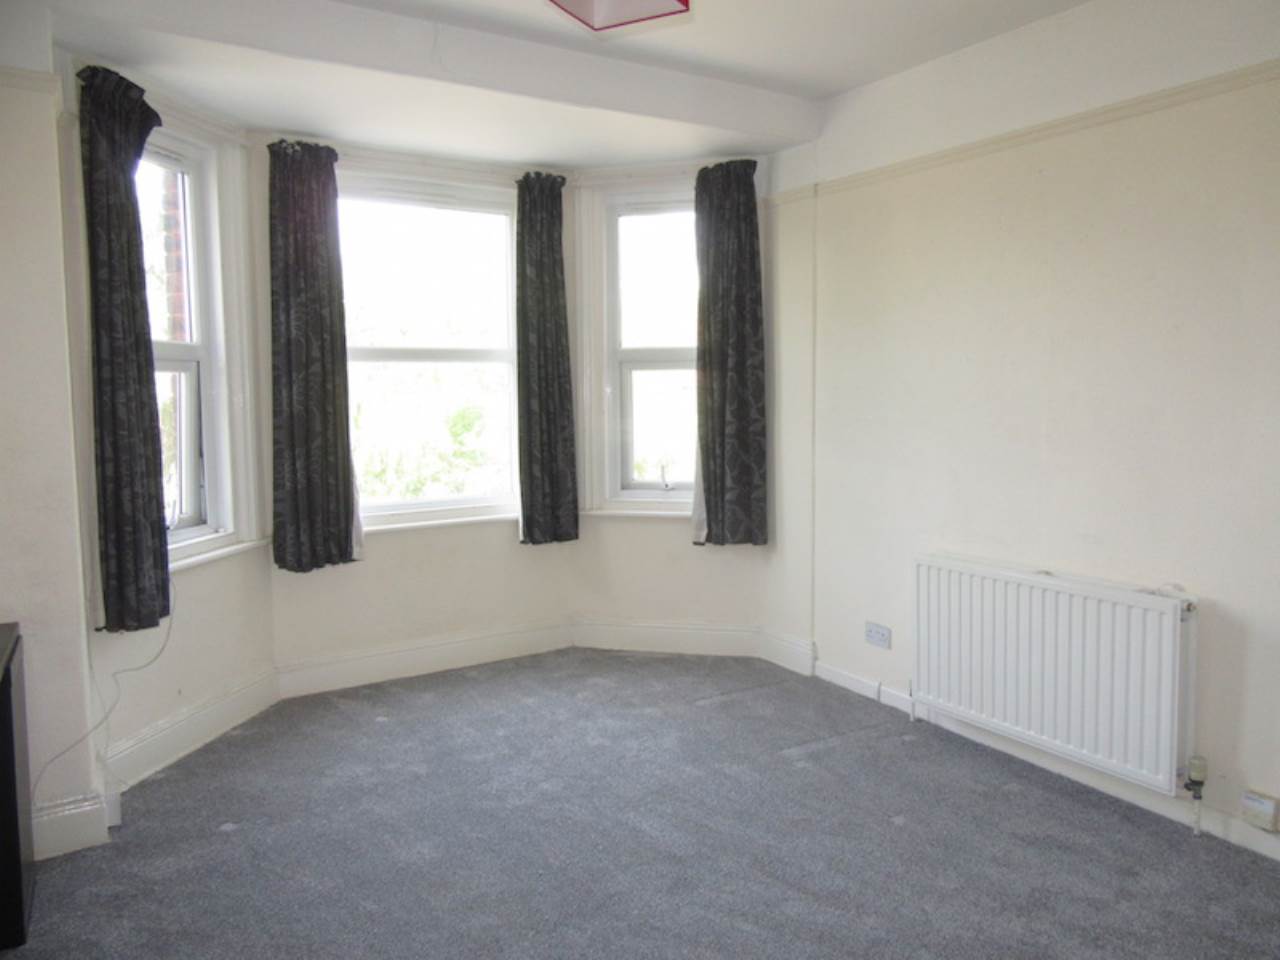 1 bed house / flat share to rent in Pennsylvania Road  - Property Image 1